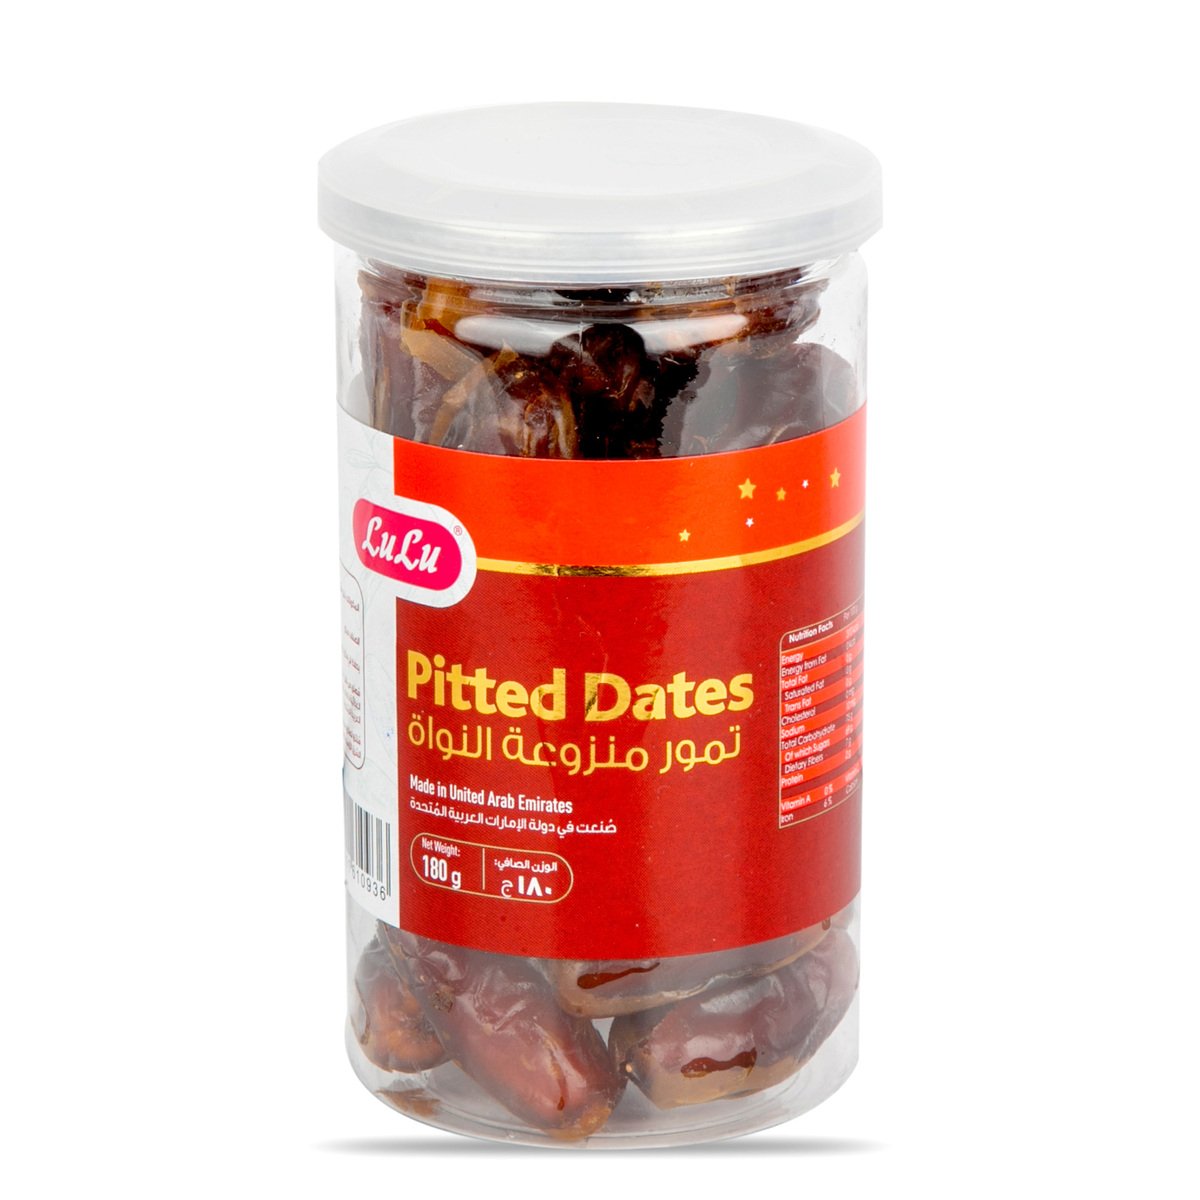 LuLu Pitted Dates 180g